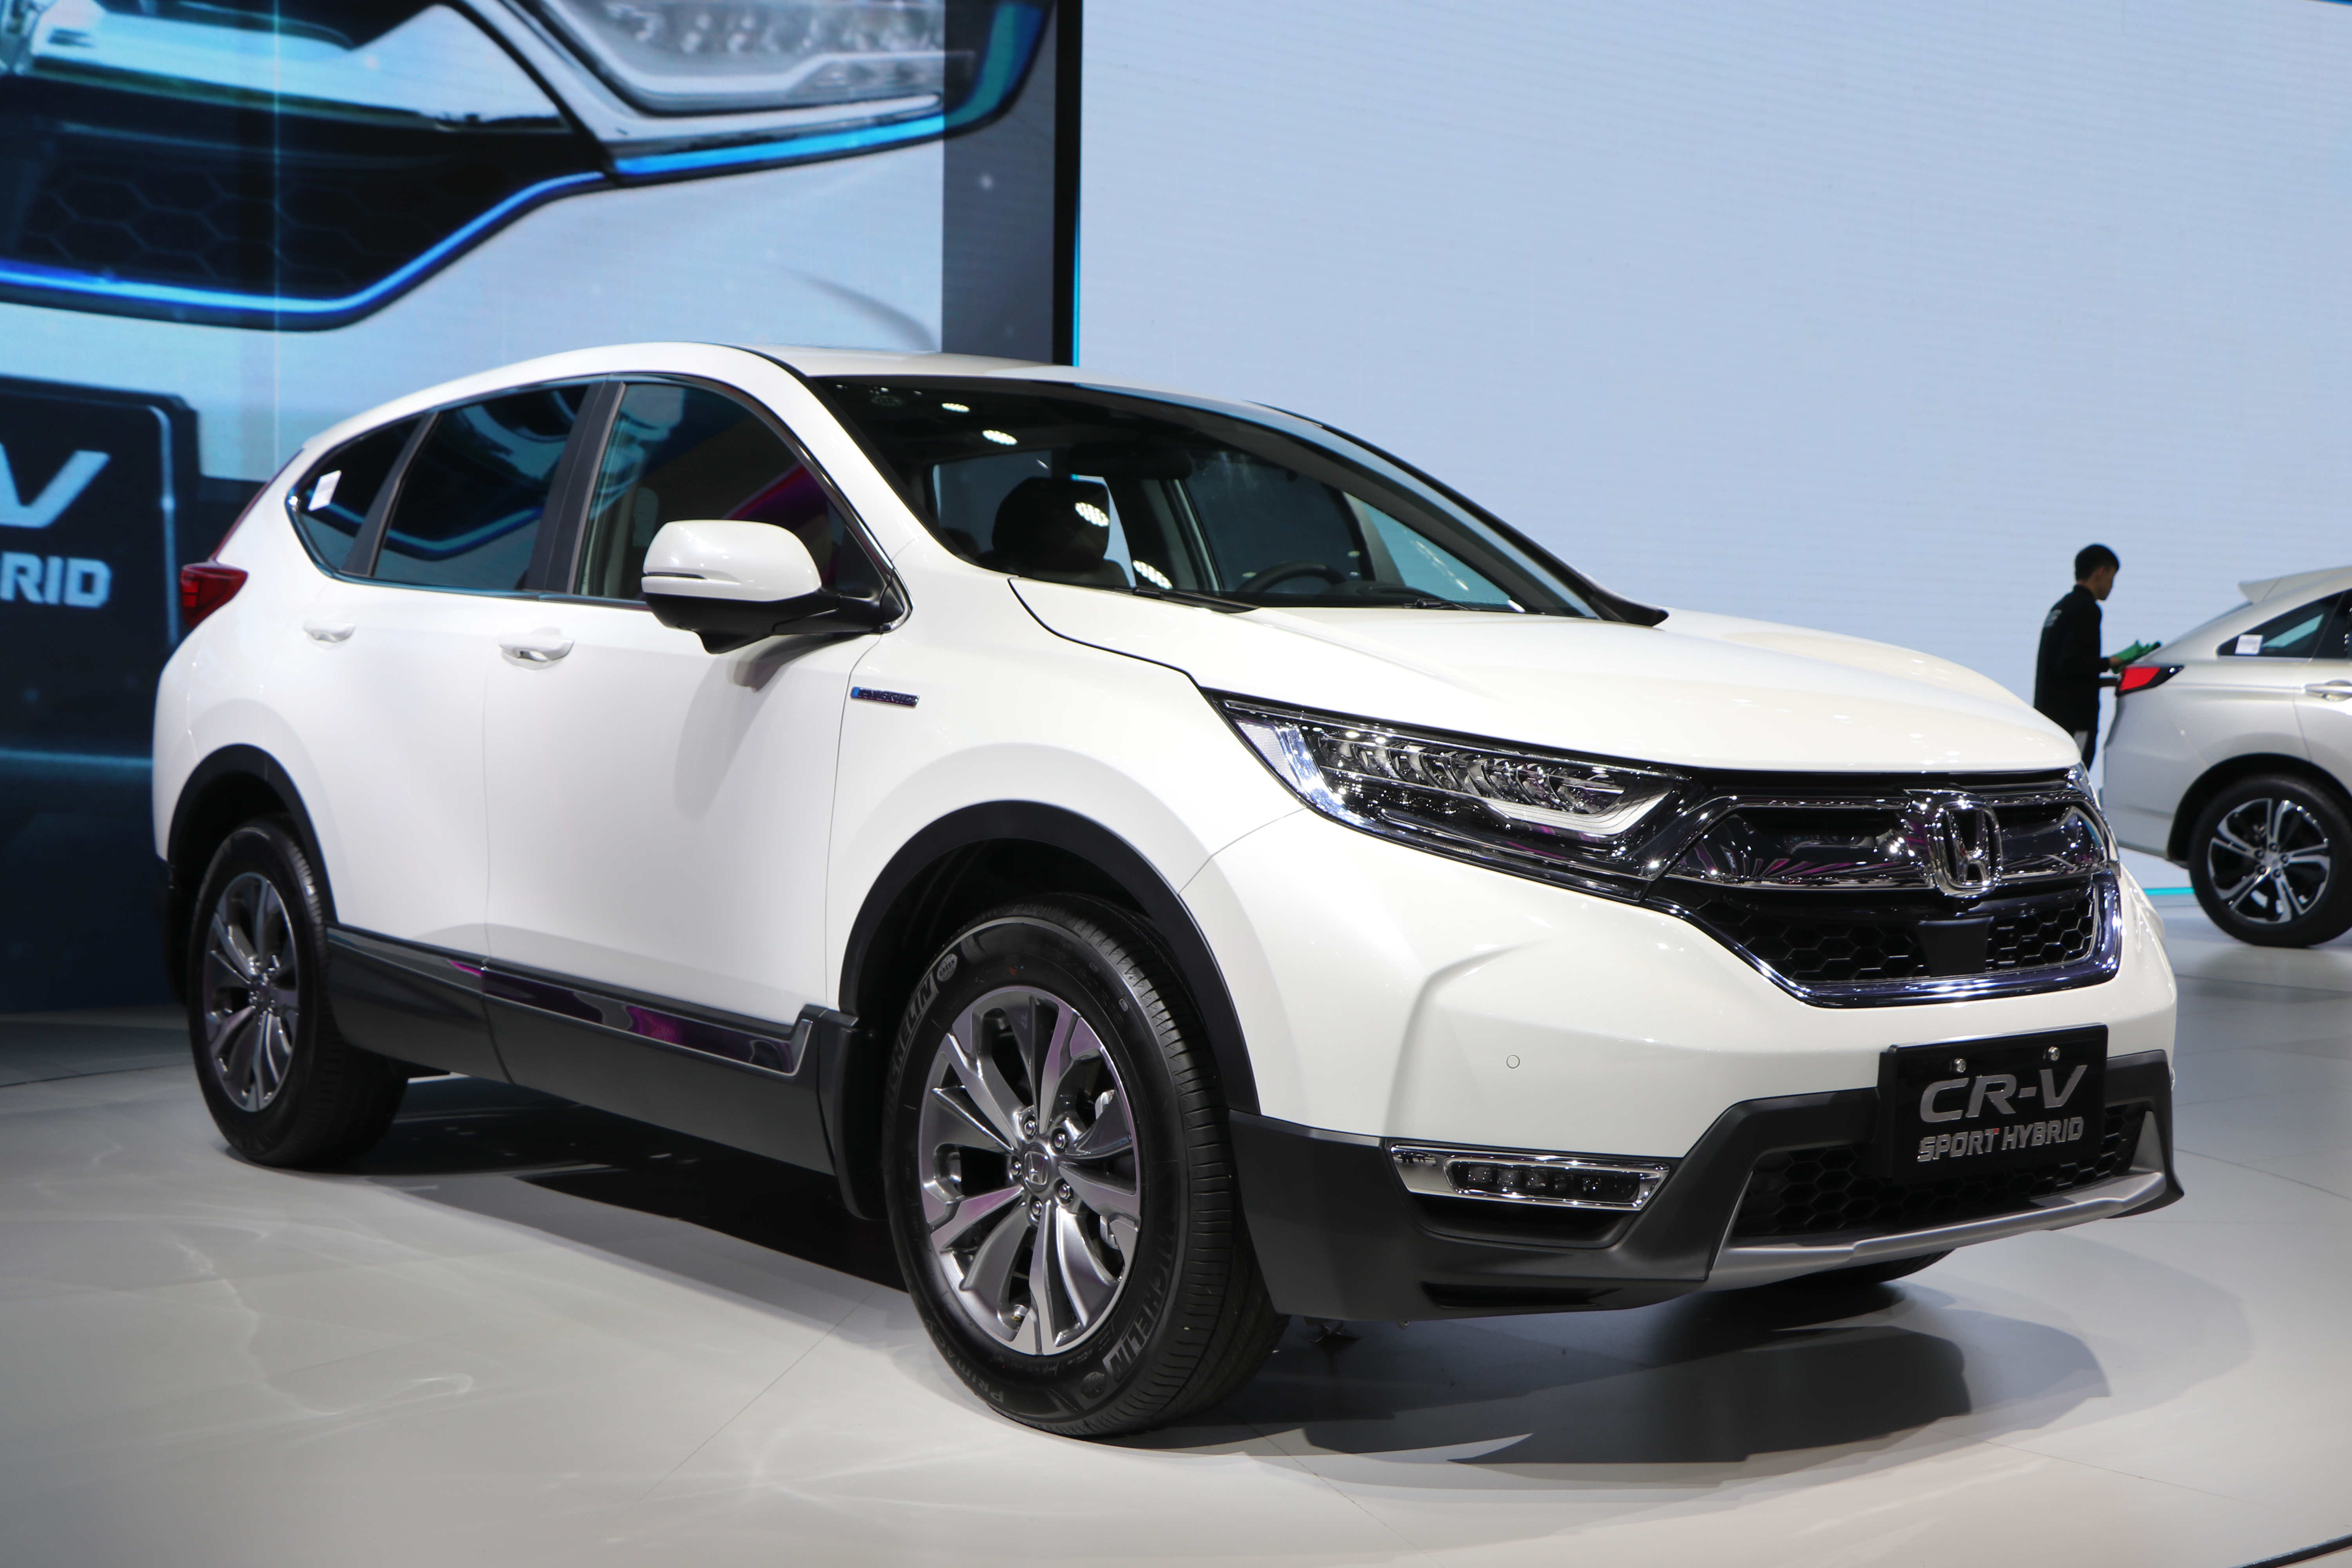 2017 Honda CRV Specifications, Pricing, Pictures and Videos